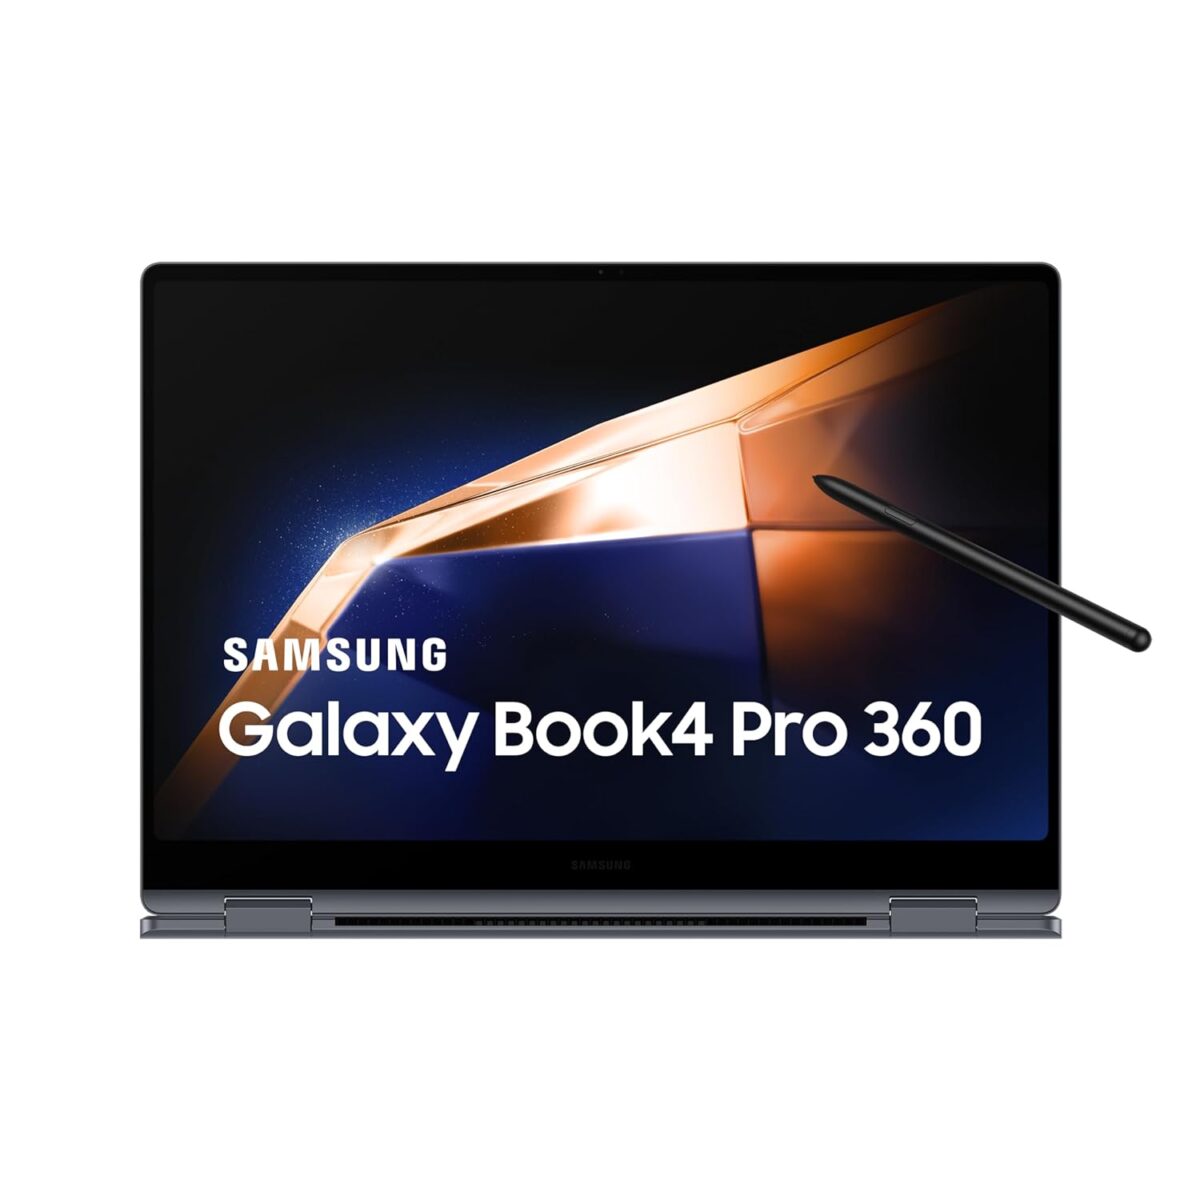 Samsung Galaxy Book4 Pro 360: The Powerhouse Convertible Arrives in India!